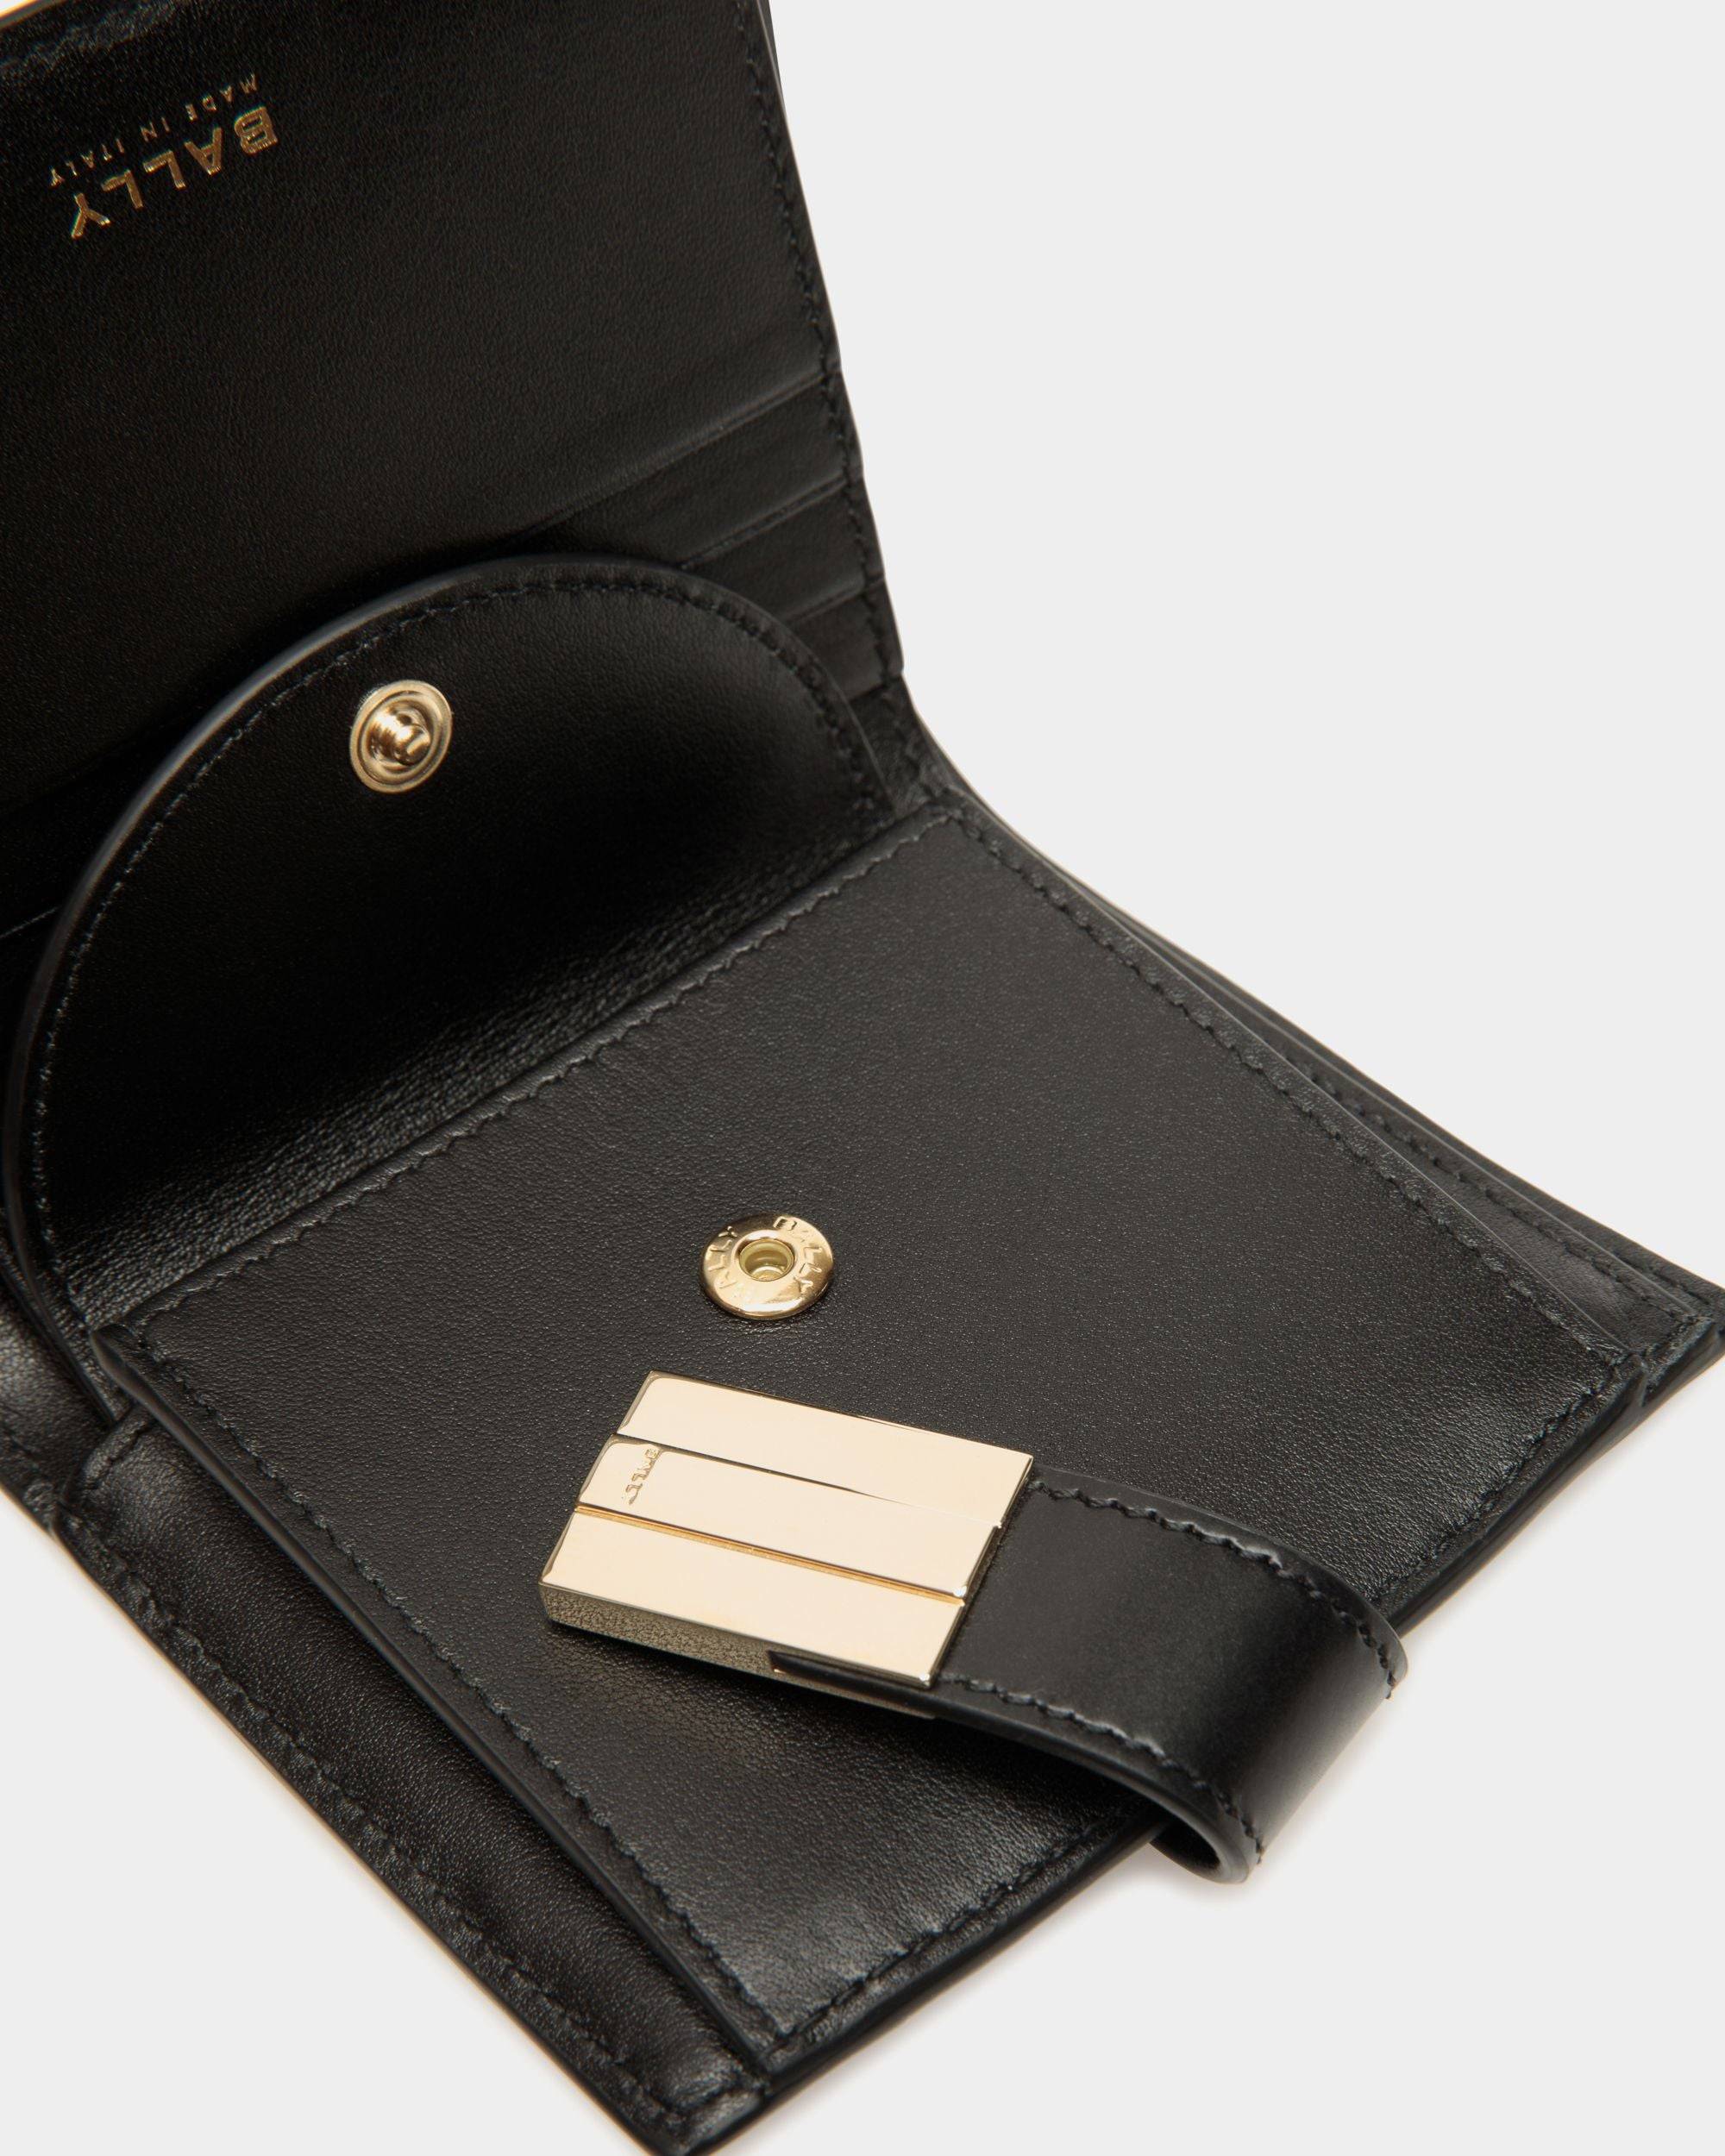 Ollam Wallet in Black Brushed Leather - Women's - Bally - 04